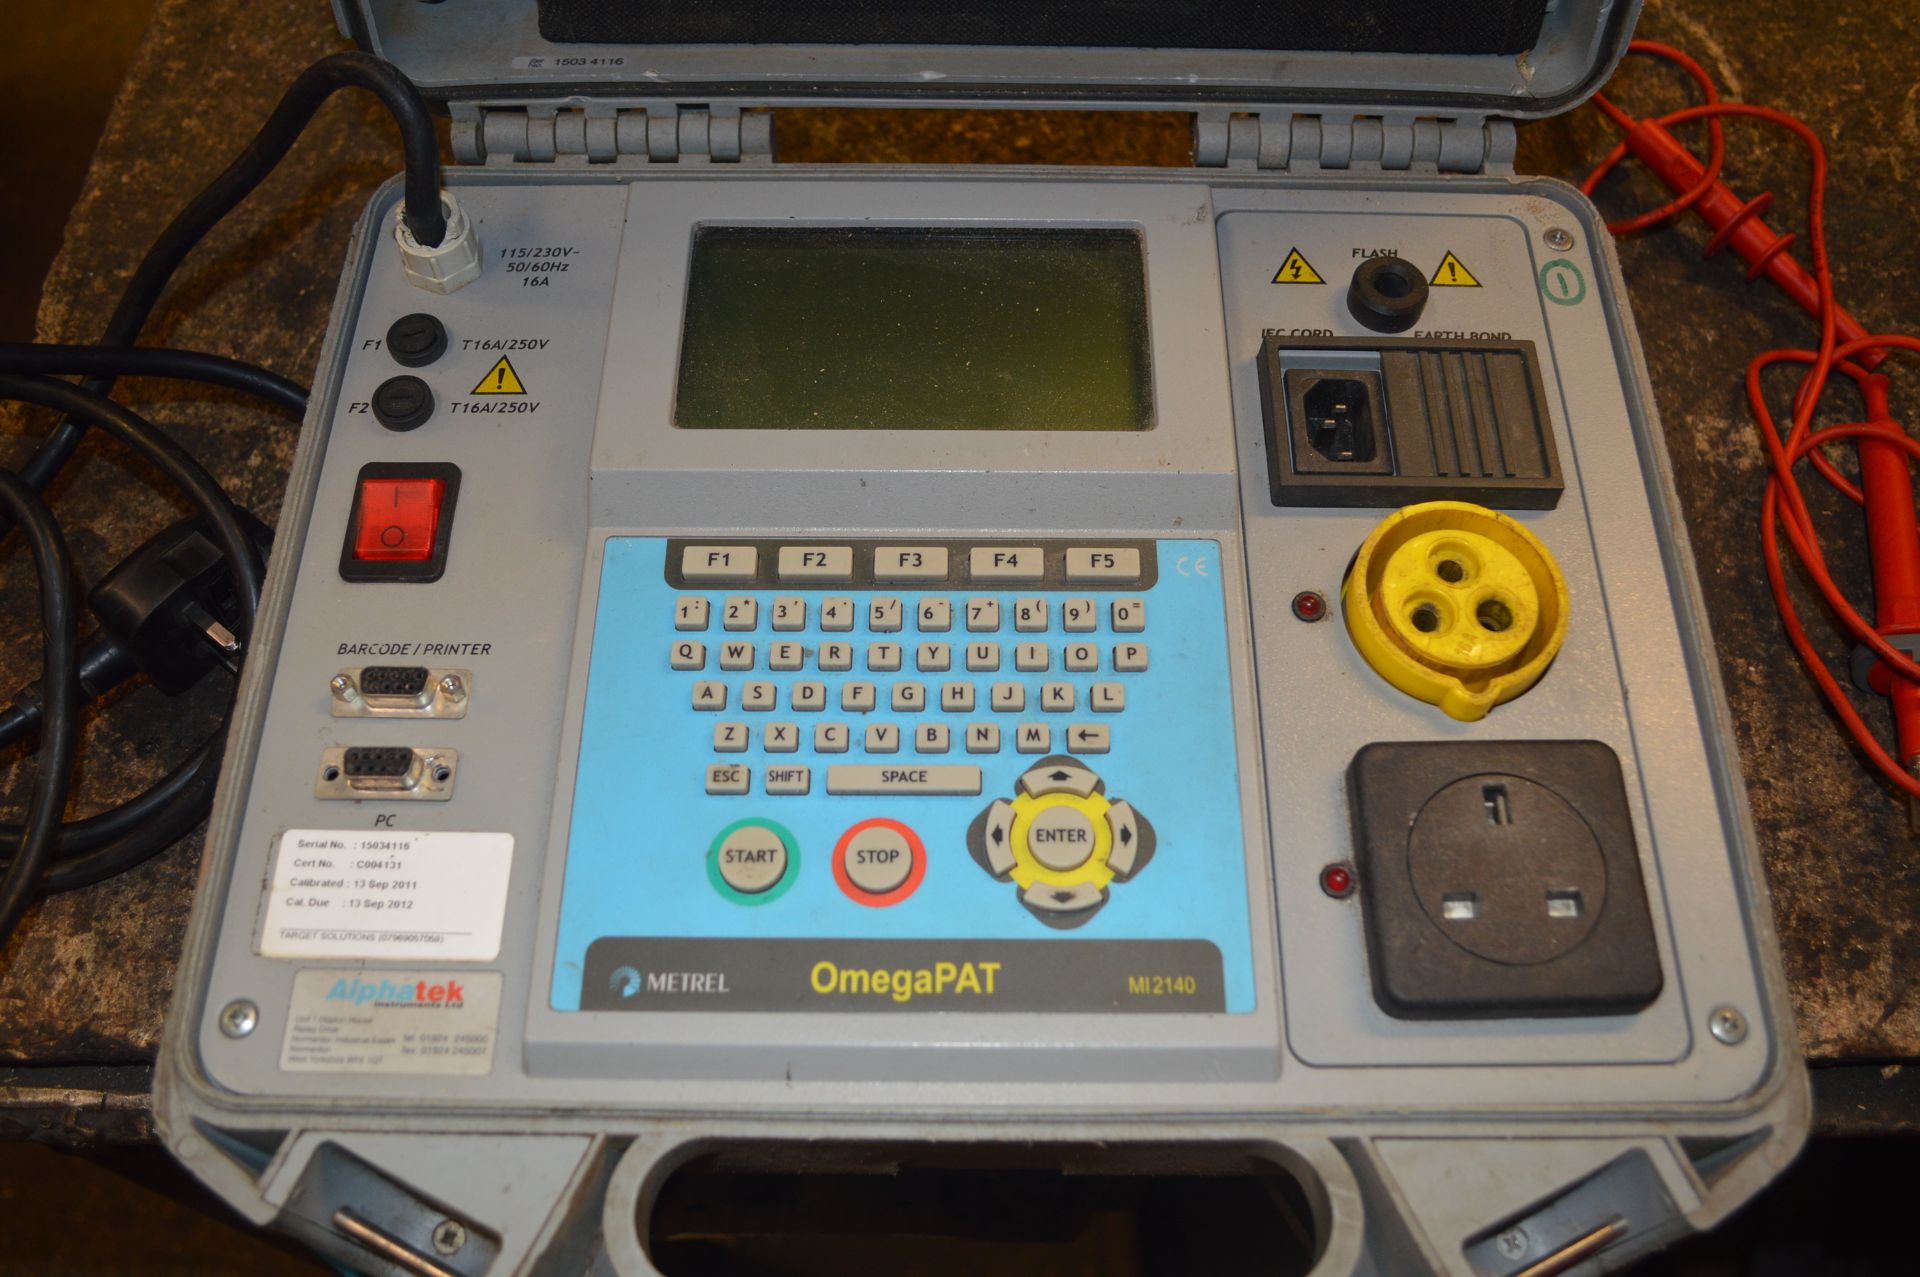 Omega Measuring Instruments & 
Tester Type Mi 2140
located at Spa Gates Ltd, Blick Road, Warwick - Image 2 of 6